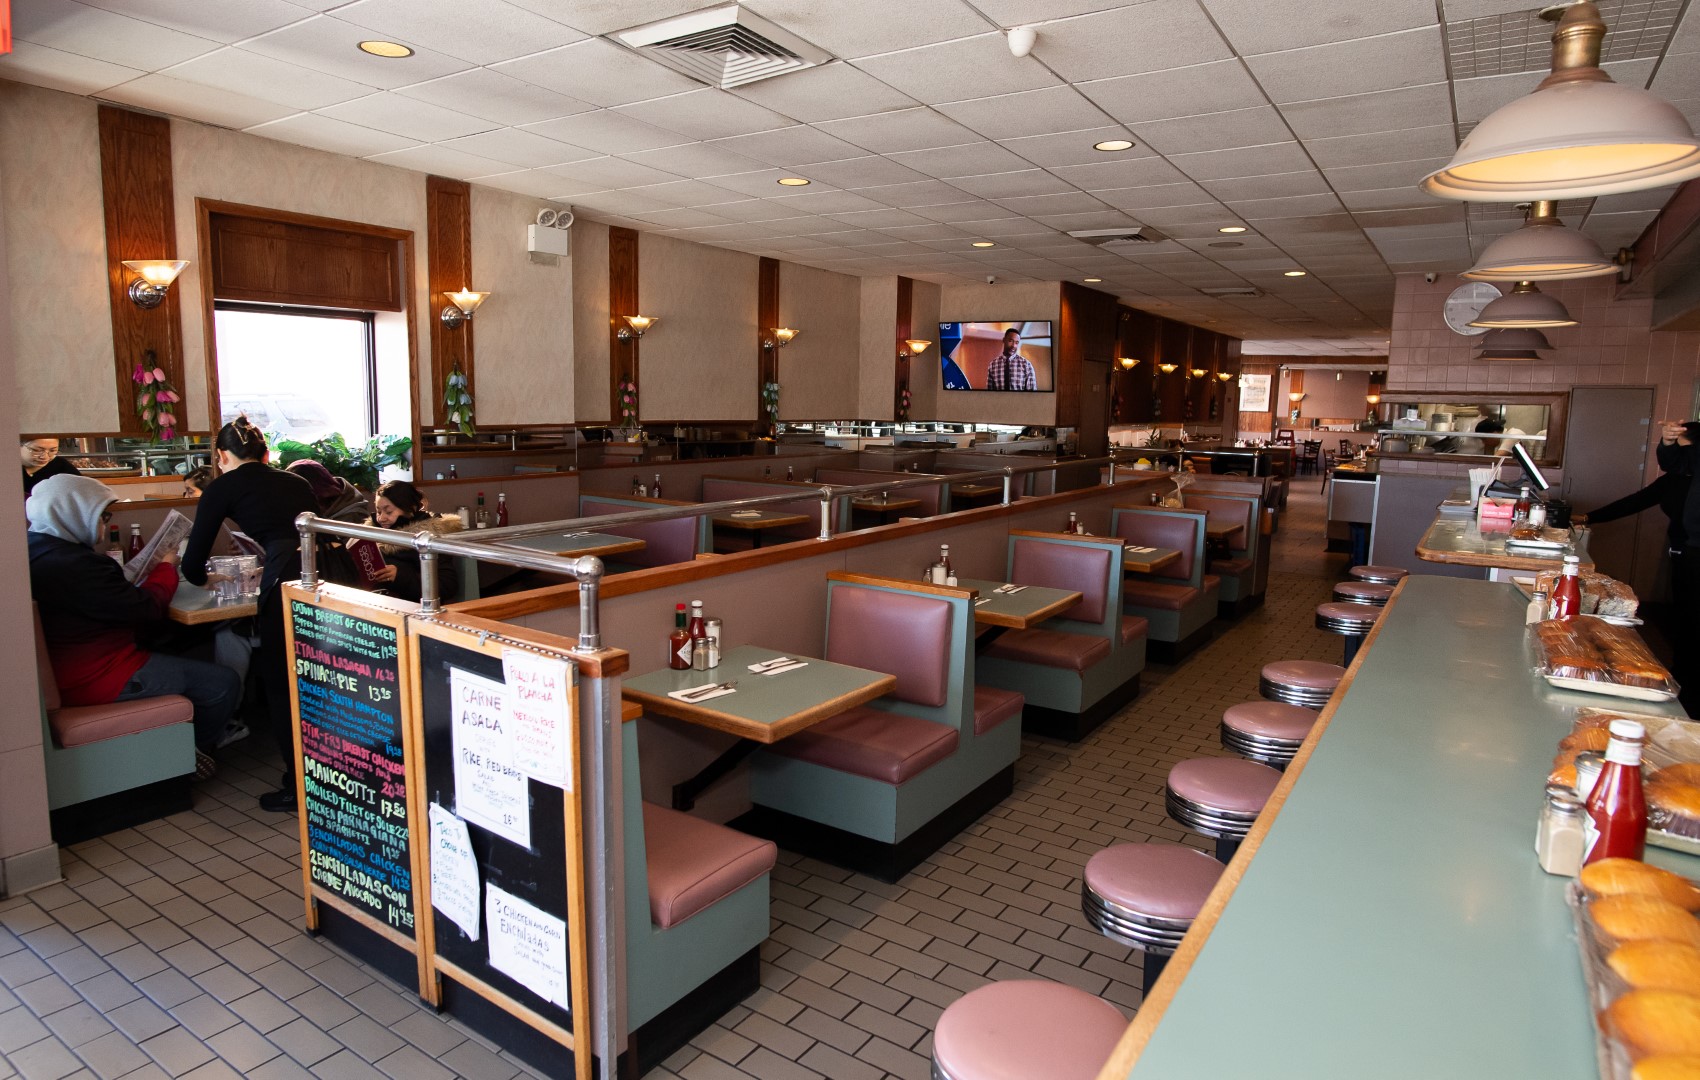 Interior of a bustling diner with pink and green booths, a counter with stools, a display of baked goods, and customers dining. a tv screens sports in the background.